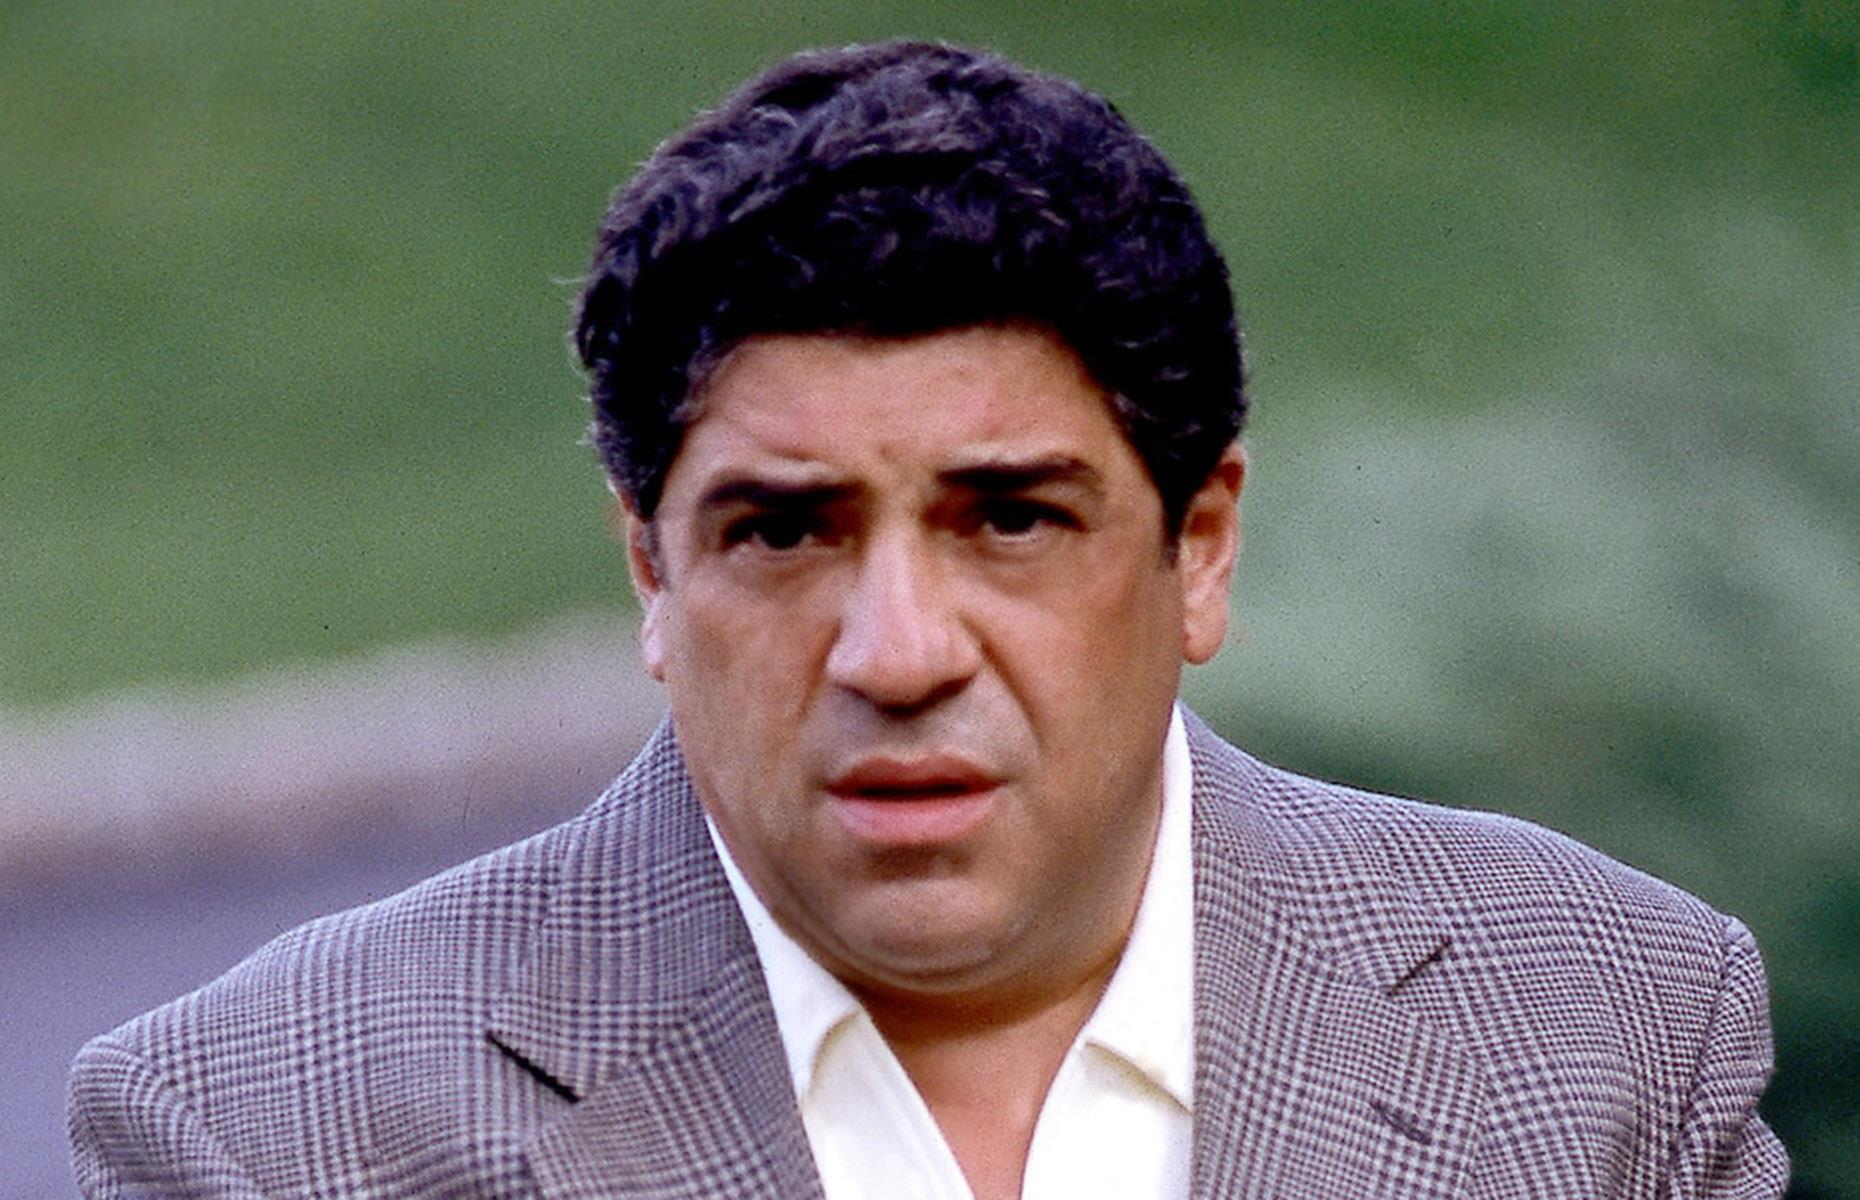 <p>Vincent Pastore played Salvatore Bonpensiero, Tony's close friend and a soldier in the DiMeo crime family. He appeared as a main character in the show's first two seasons, and then guest-starred in seasons five and six. </p>  <p>Pastore made his acting debut in the 1988 horror movie <em>Black Roses.</em></p>  <p>Before landing his career-defining role in <em>The Sopranos,</em> Pastore had already cut his teeth in a number of other iconic crime dramas, including <em>GoodFellas</em> (1990) and <em>Carlito’s Way </em>(1993). </p>